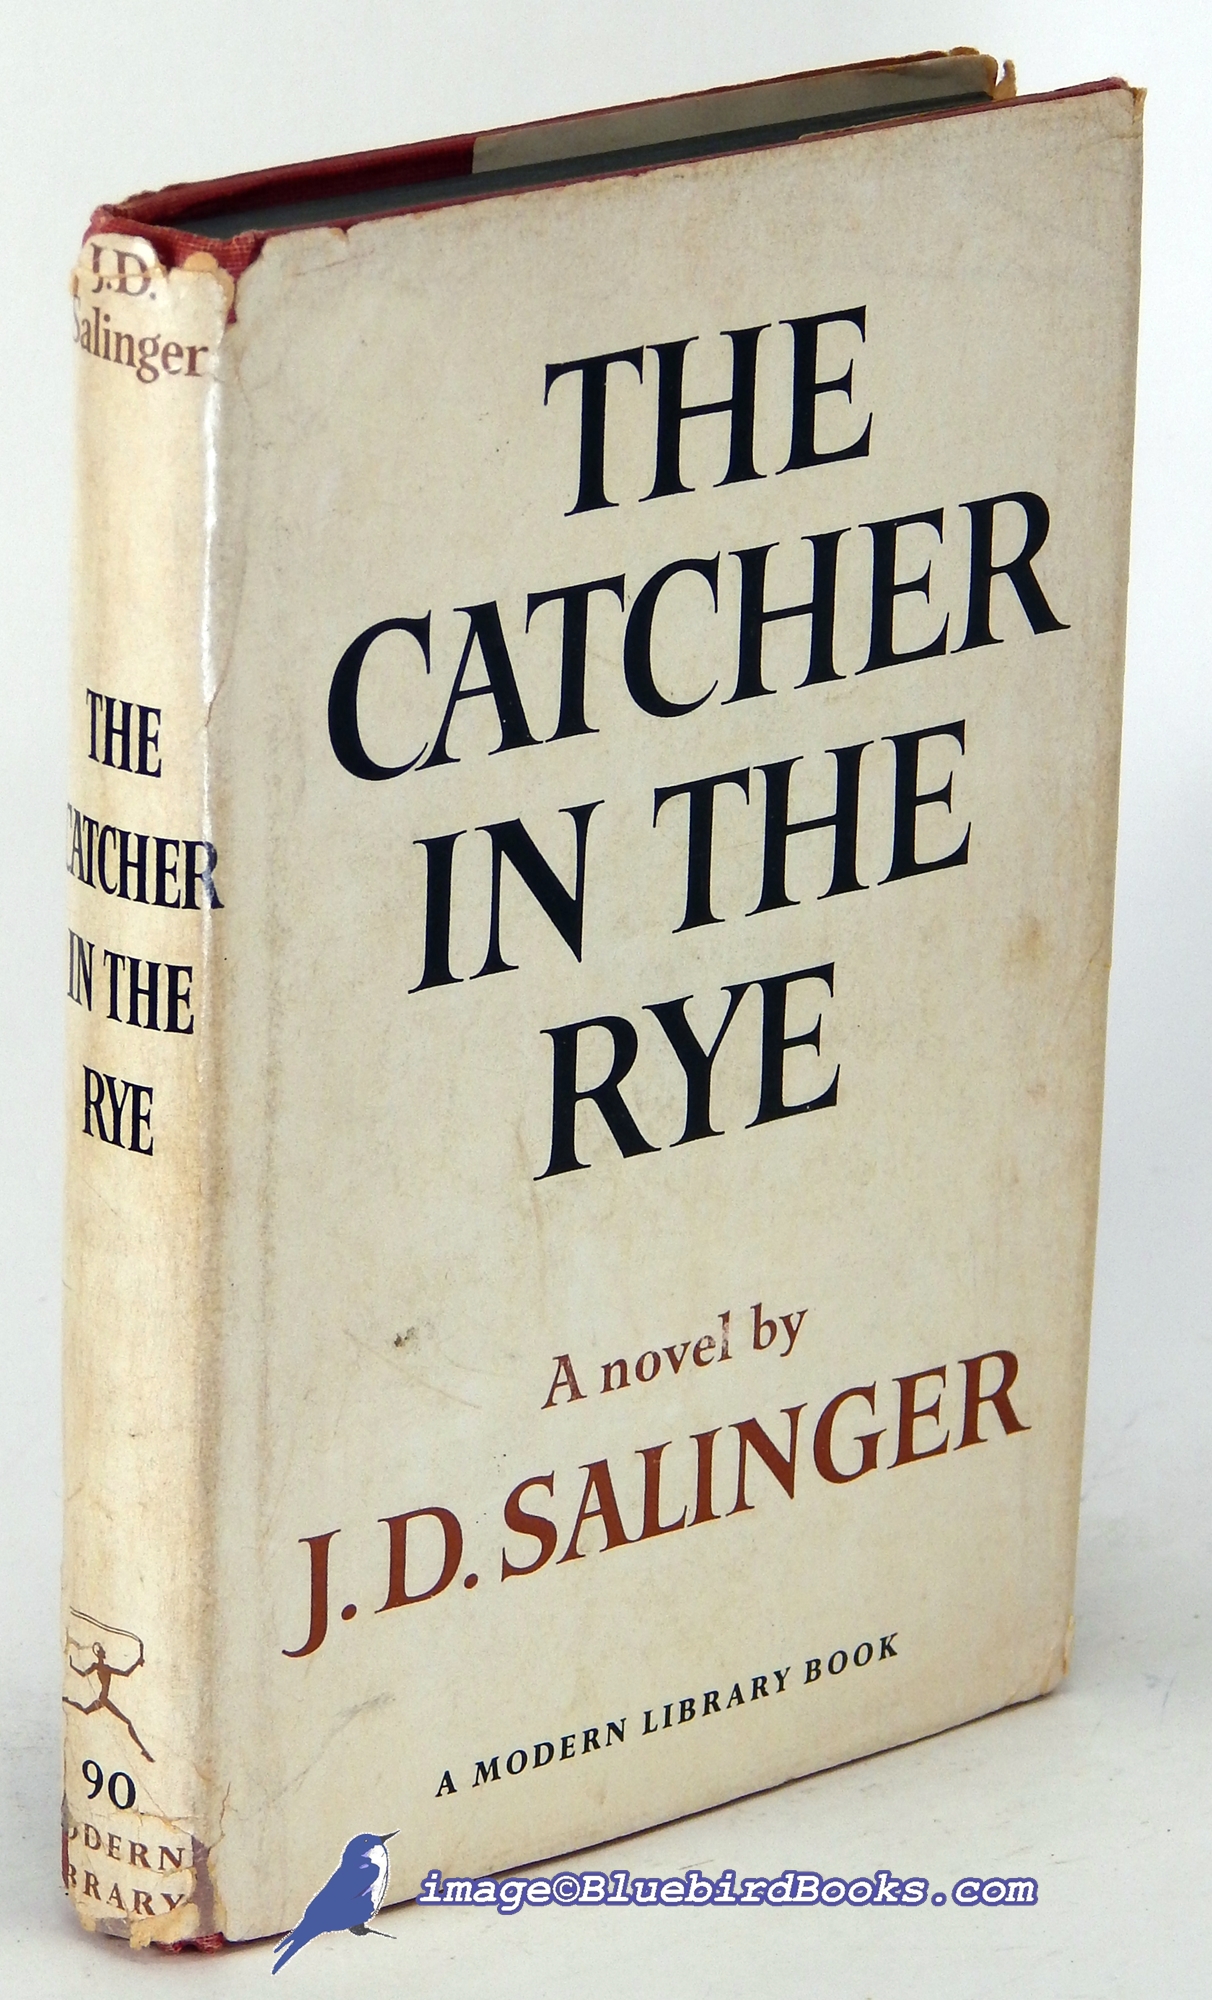 Image for The Catcher in the Rye (Modern Library #90.2)